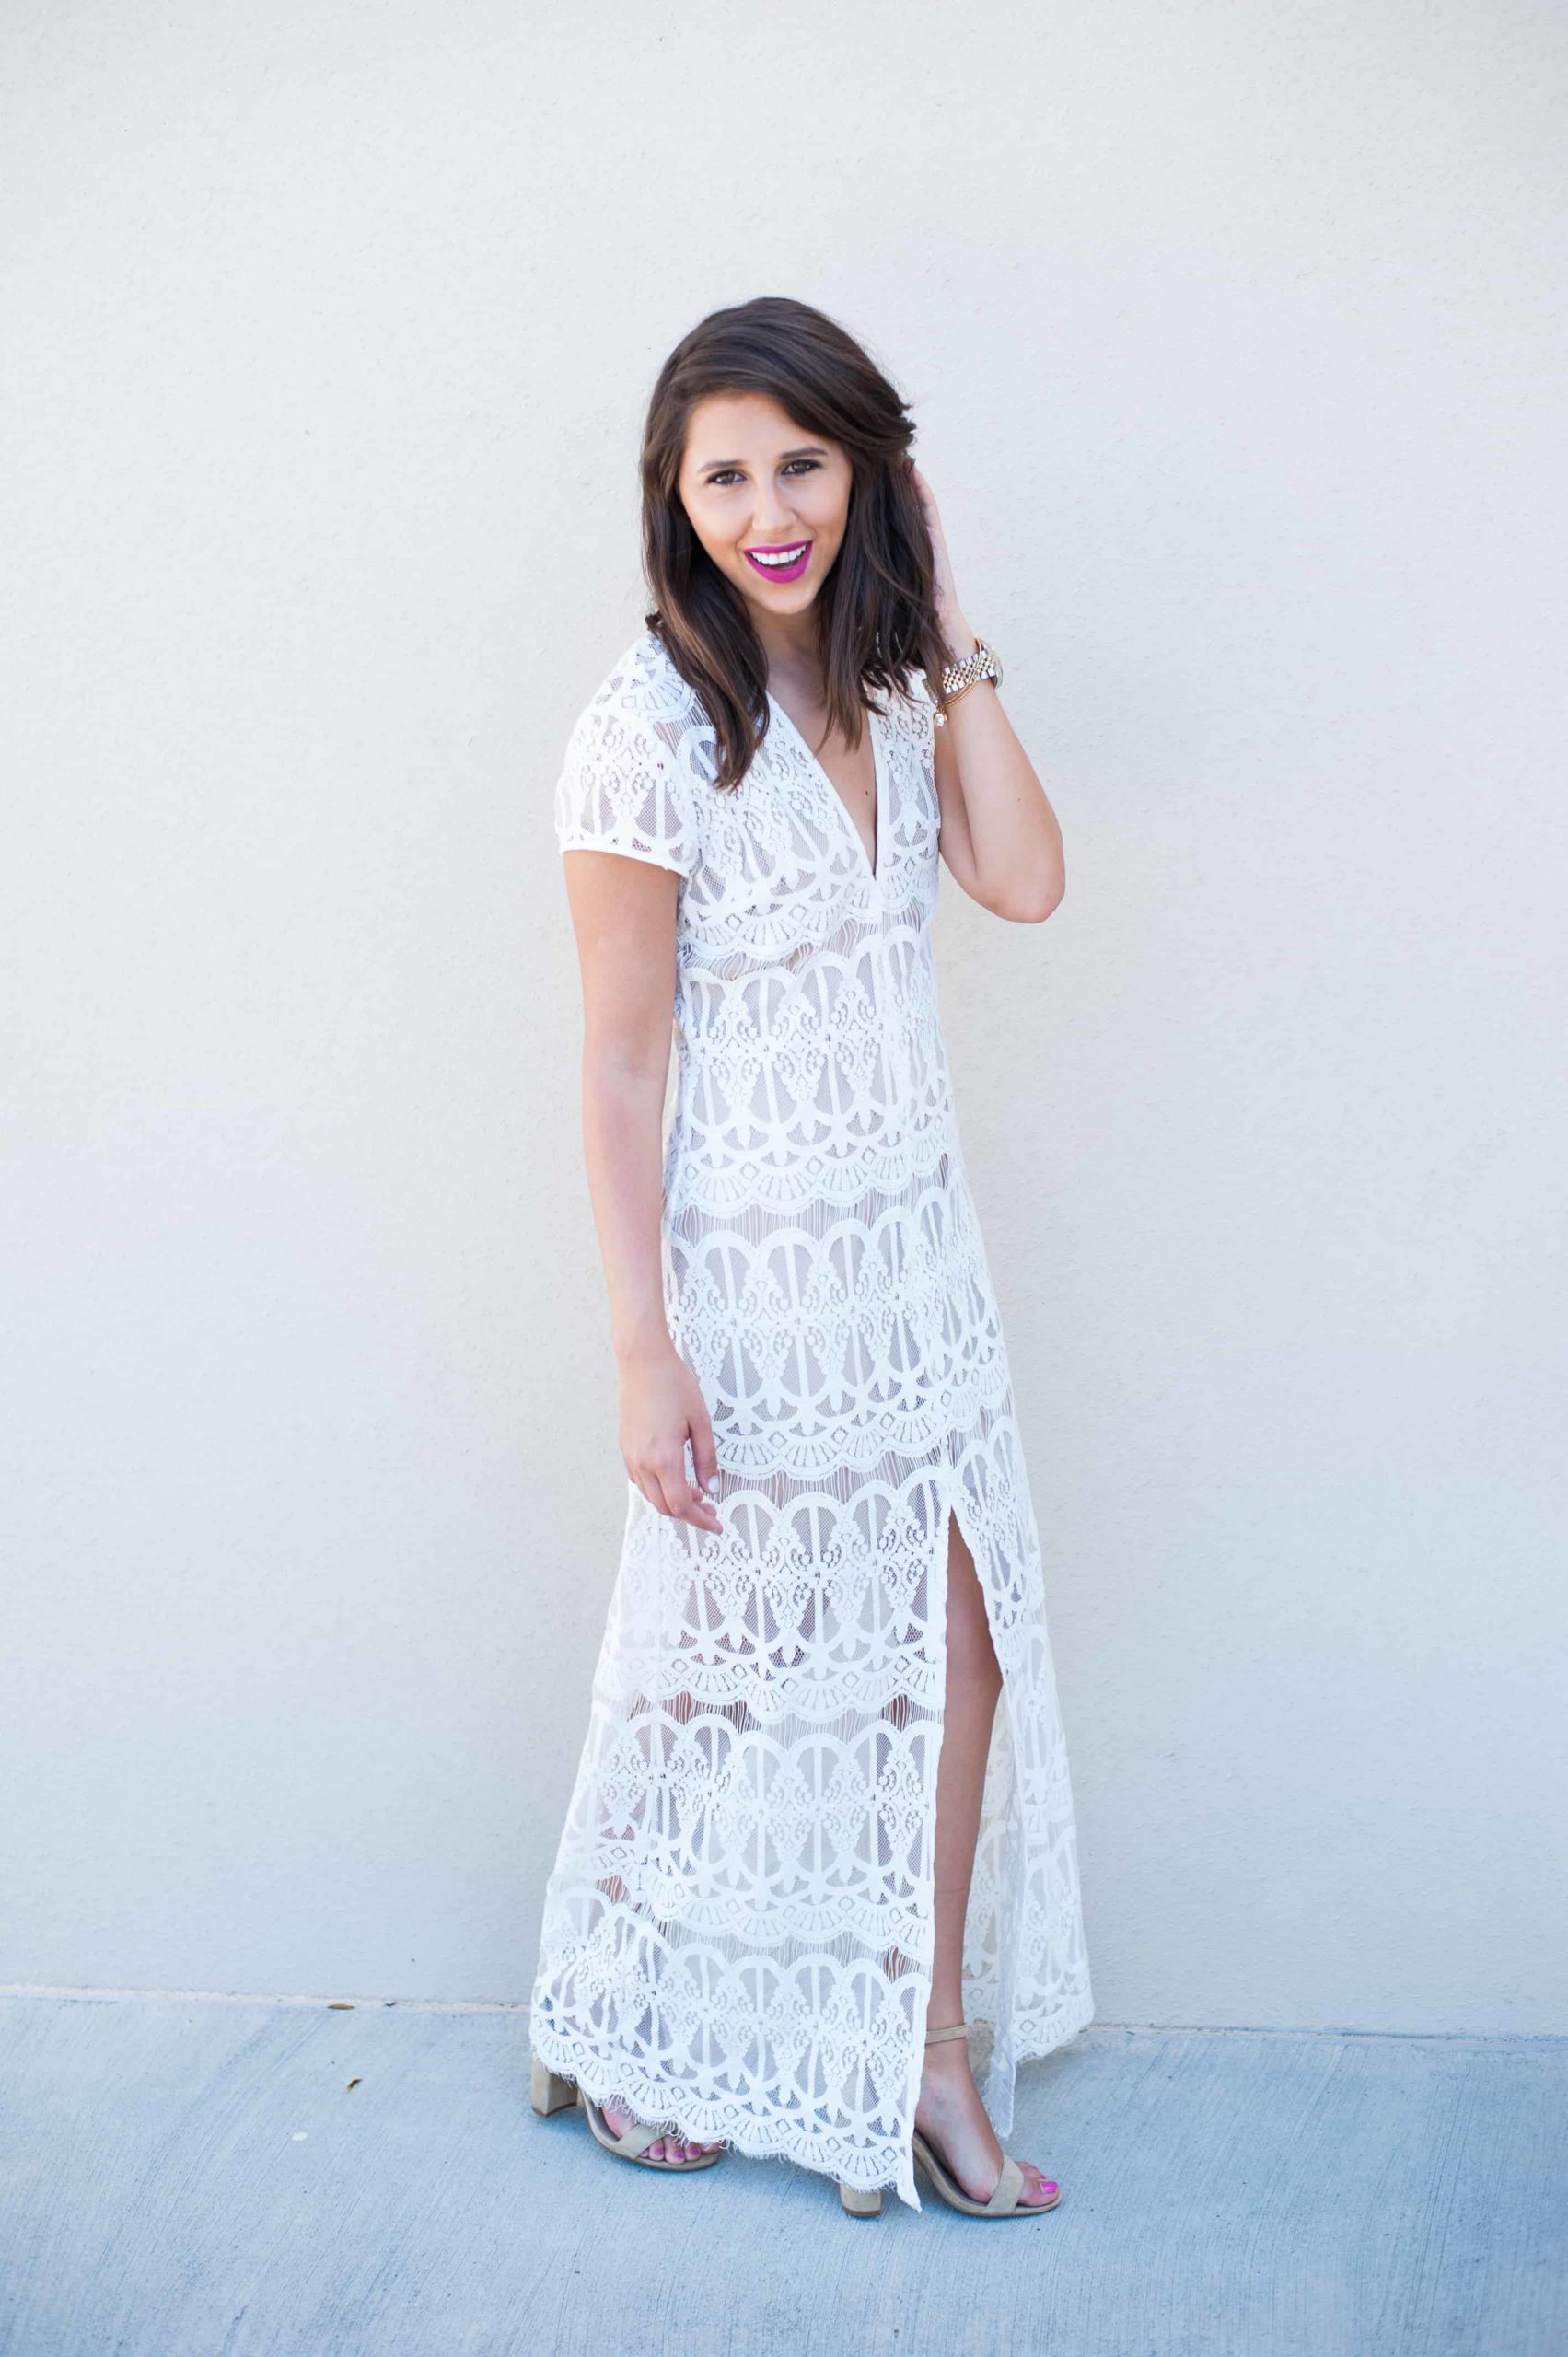 Dress Up Buttercup // A Houston-based fashion and inspiration blog developed to daily inspire your own personal style by Dede Raad | Lace Maxi